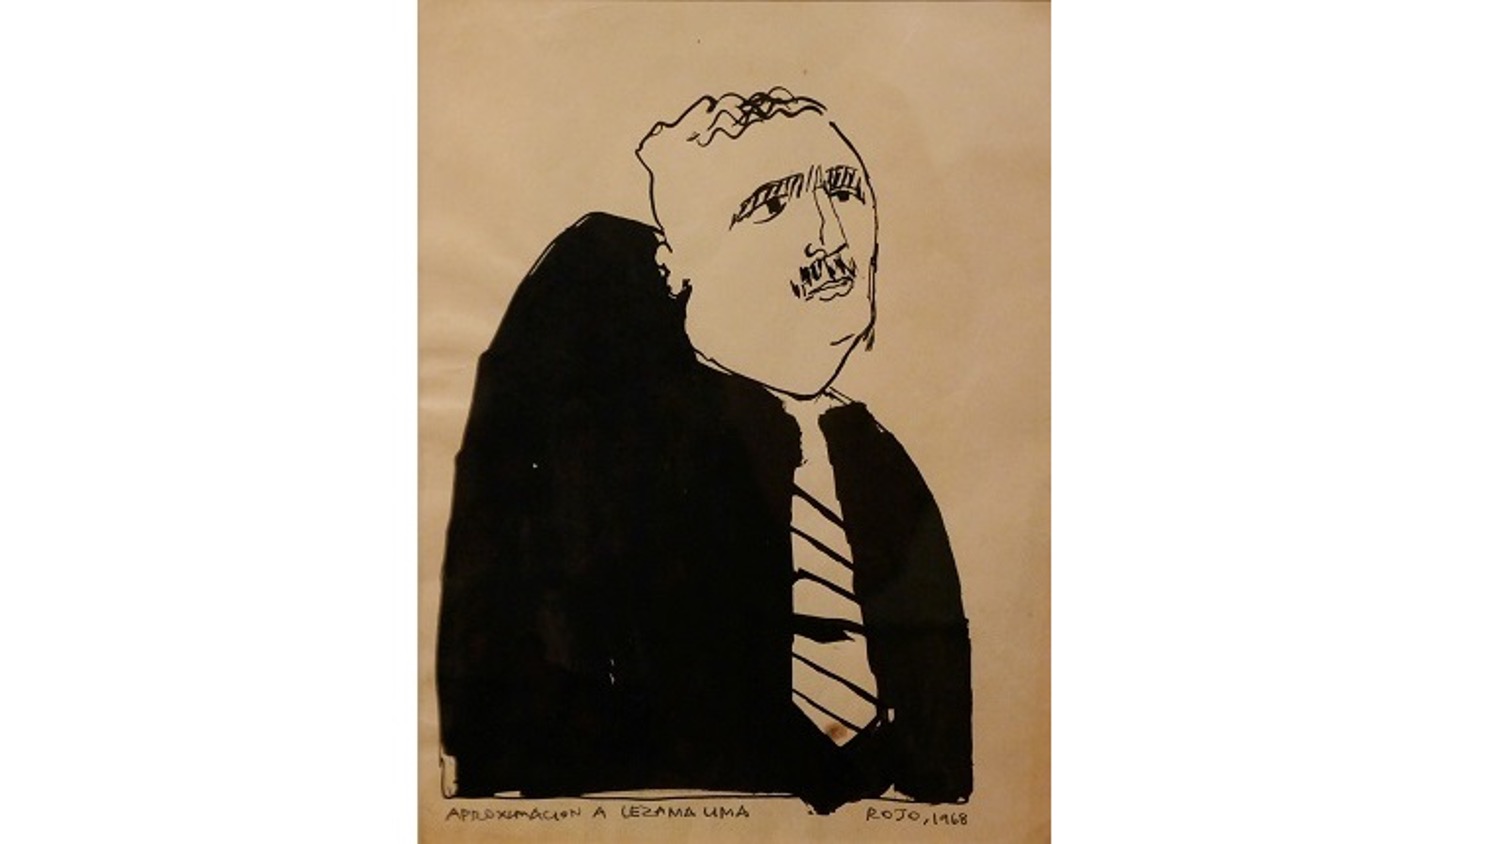 Vicente Rojo. "Portrait of Lezama Lima", 1968 (Editorial Era publishes "Paradise" considered first edition). Original ink drawing on paper. 30 x 21 cm